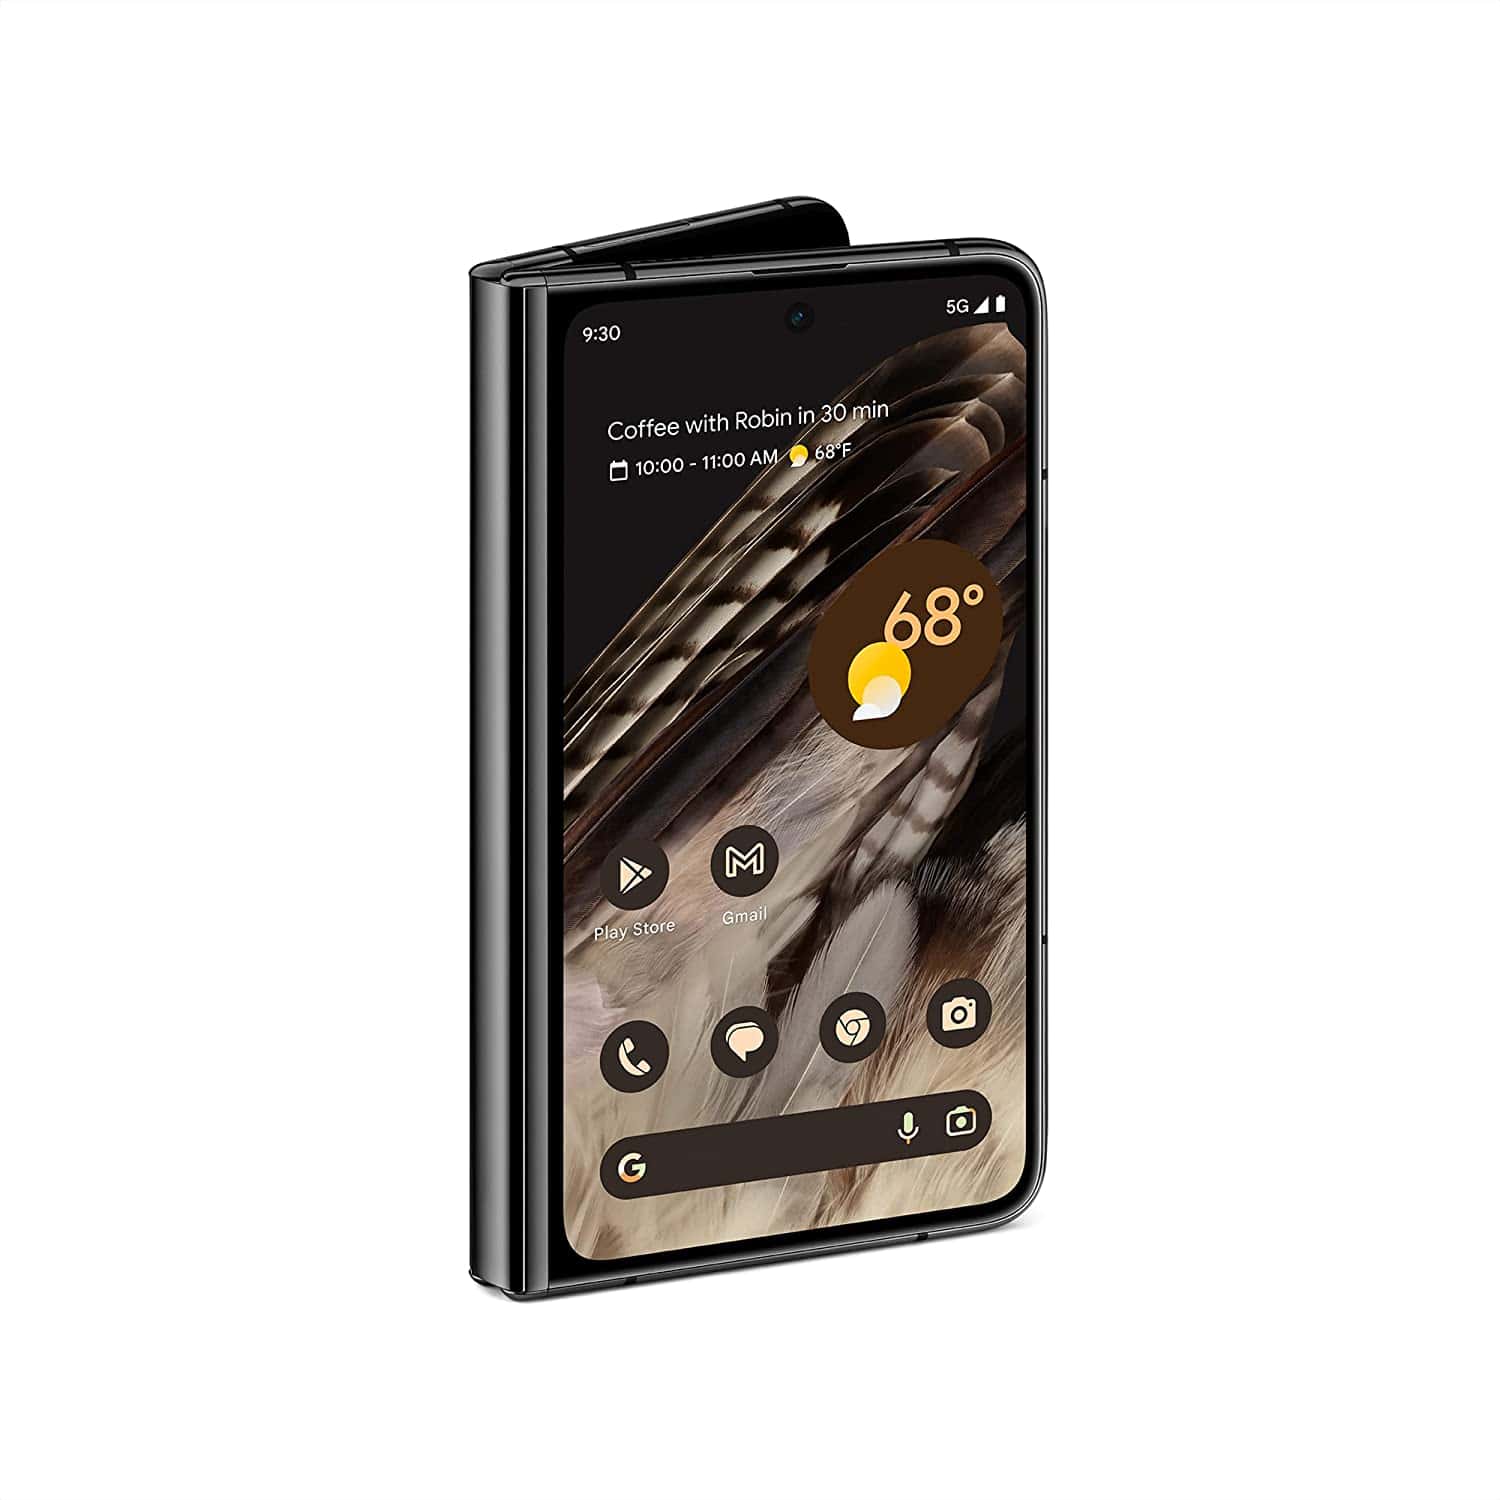 Samsung galaxy s10e wallet case - black. Featuring a sleek design and durable construction, this wallet case is the perfect accessory for your Samsung Galaxy S10e. Keep your device well-